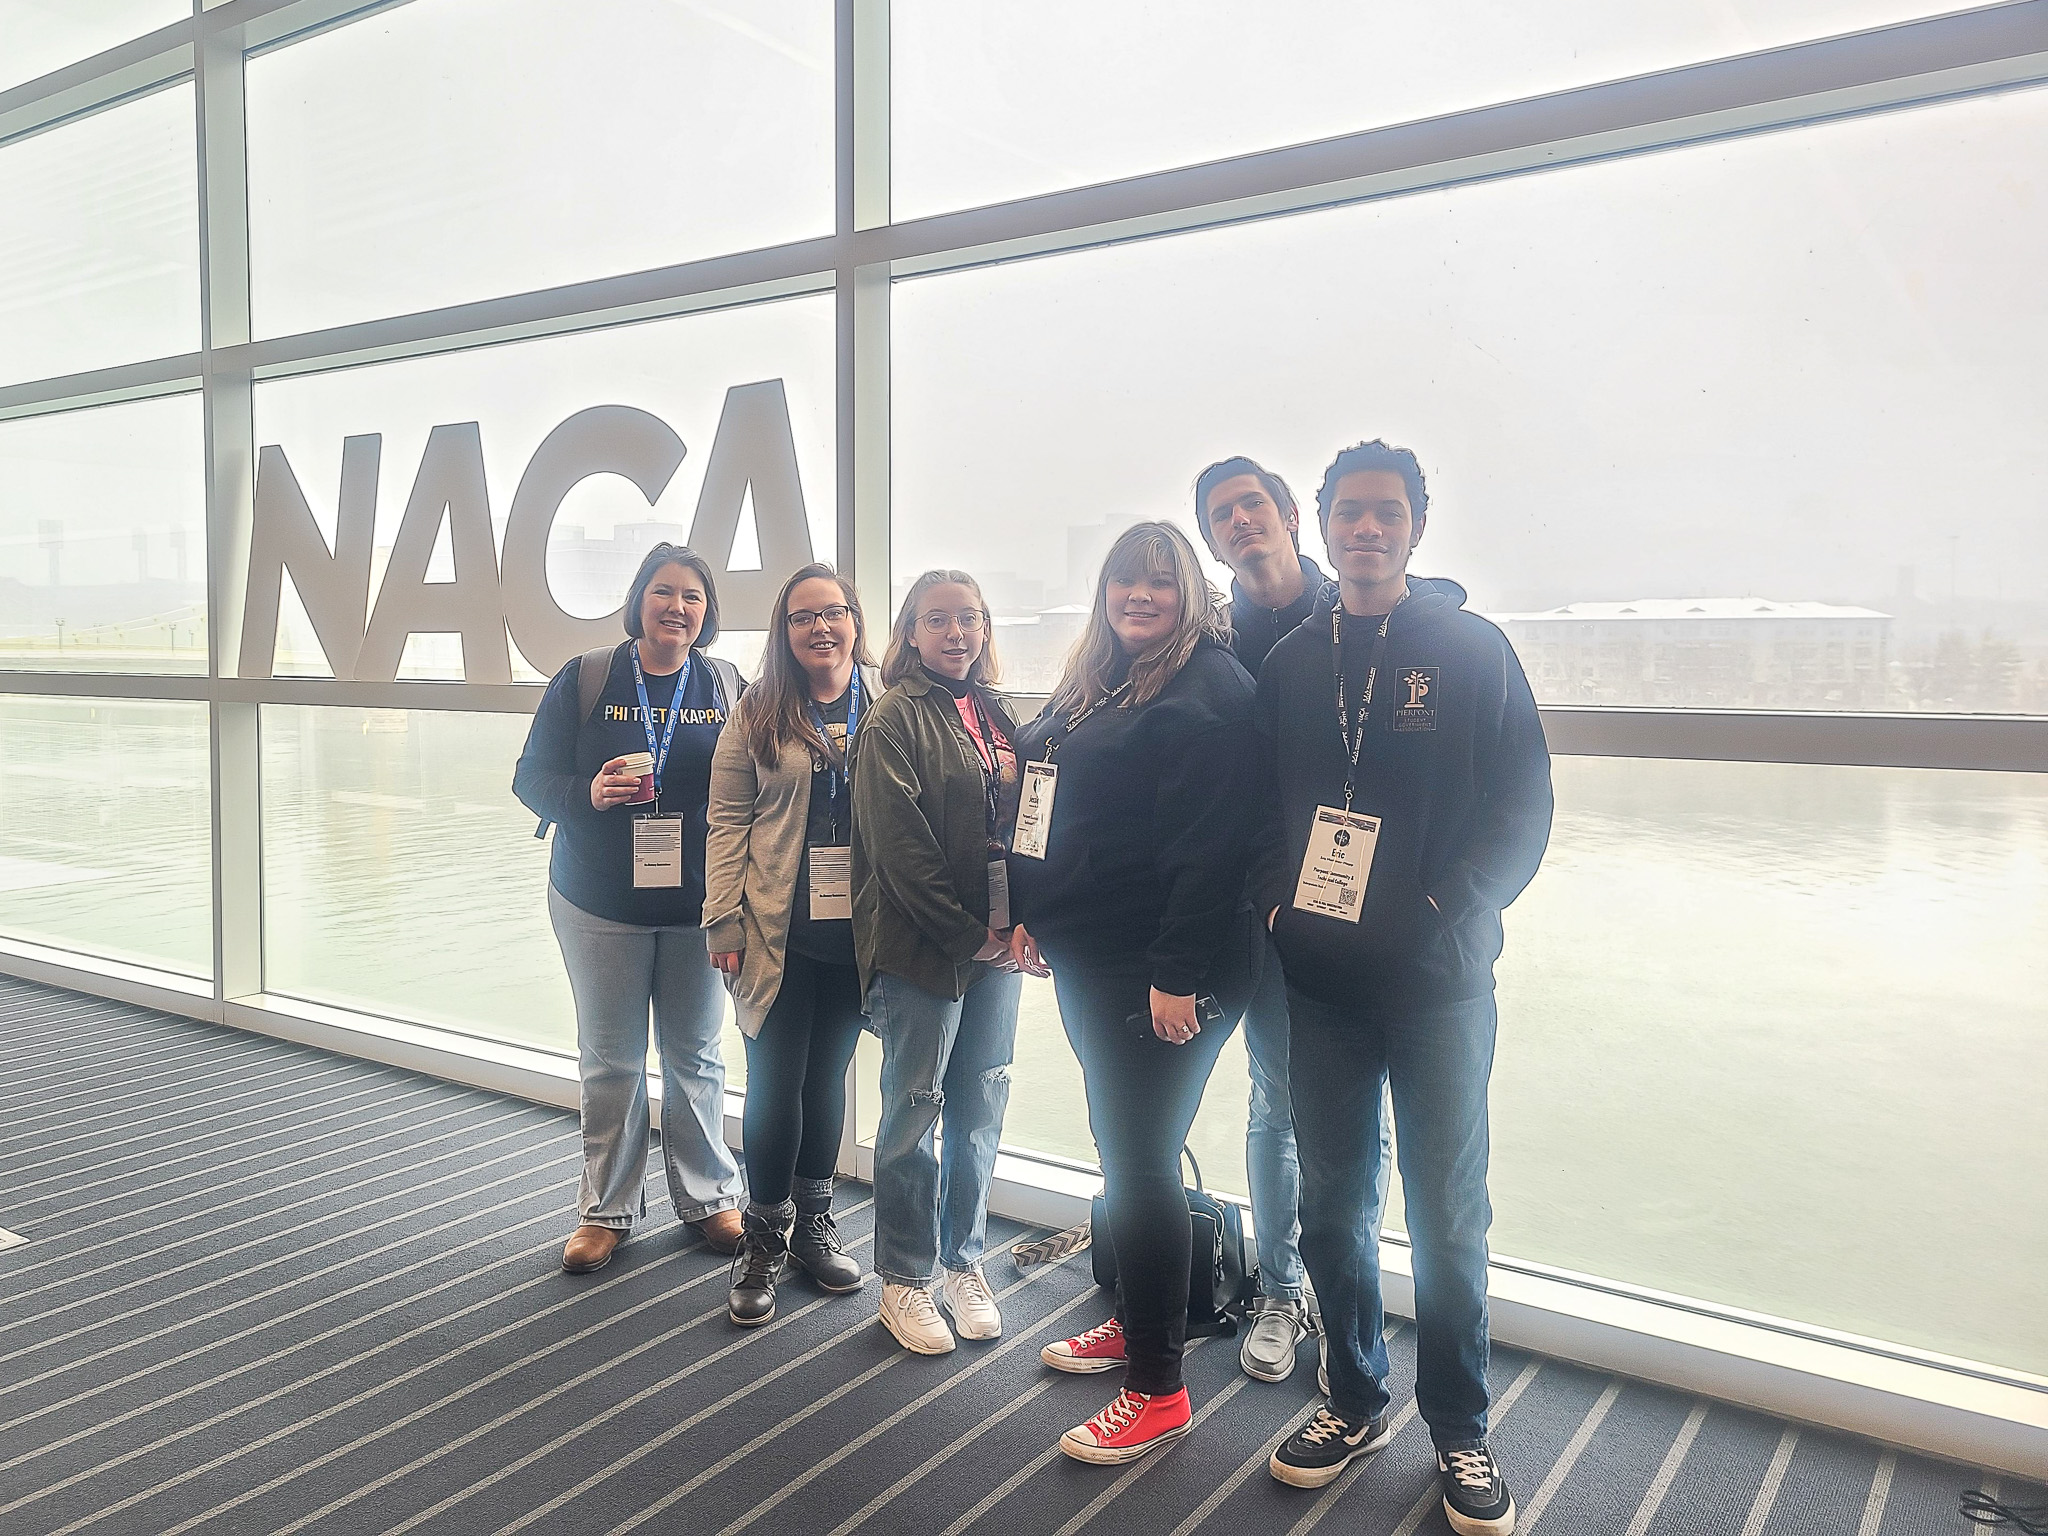 A group of students pose for a photo in front of a sign reading, "NACA."